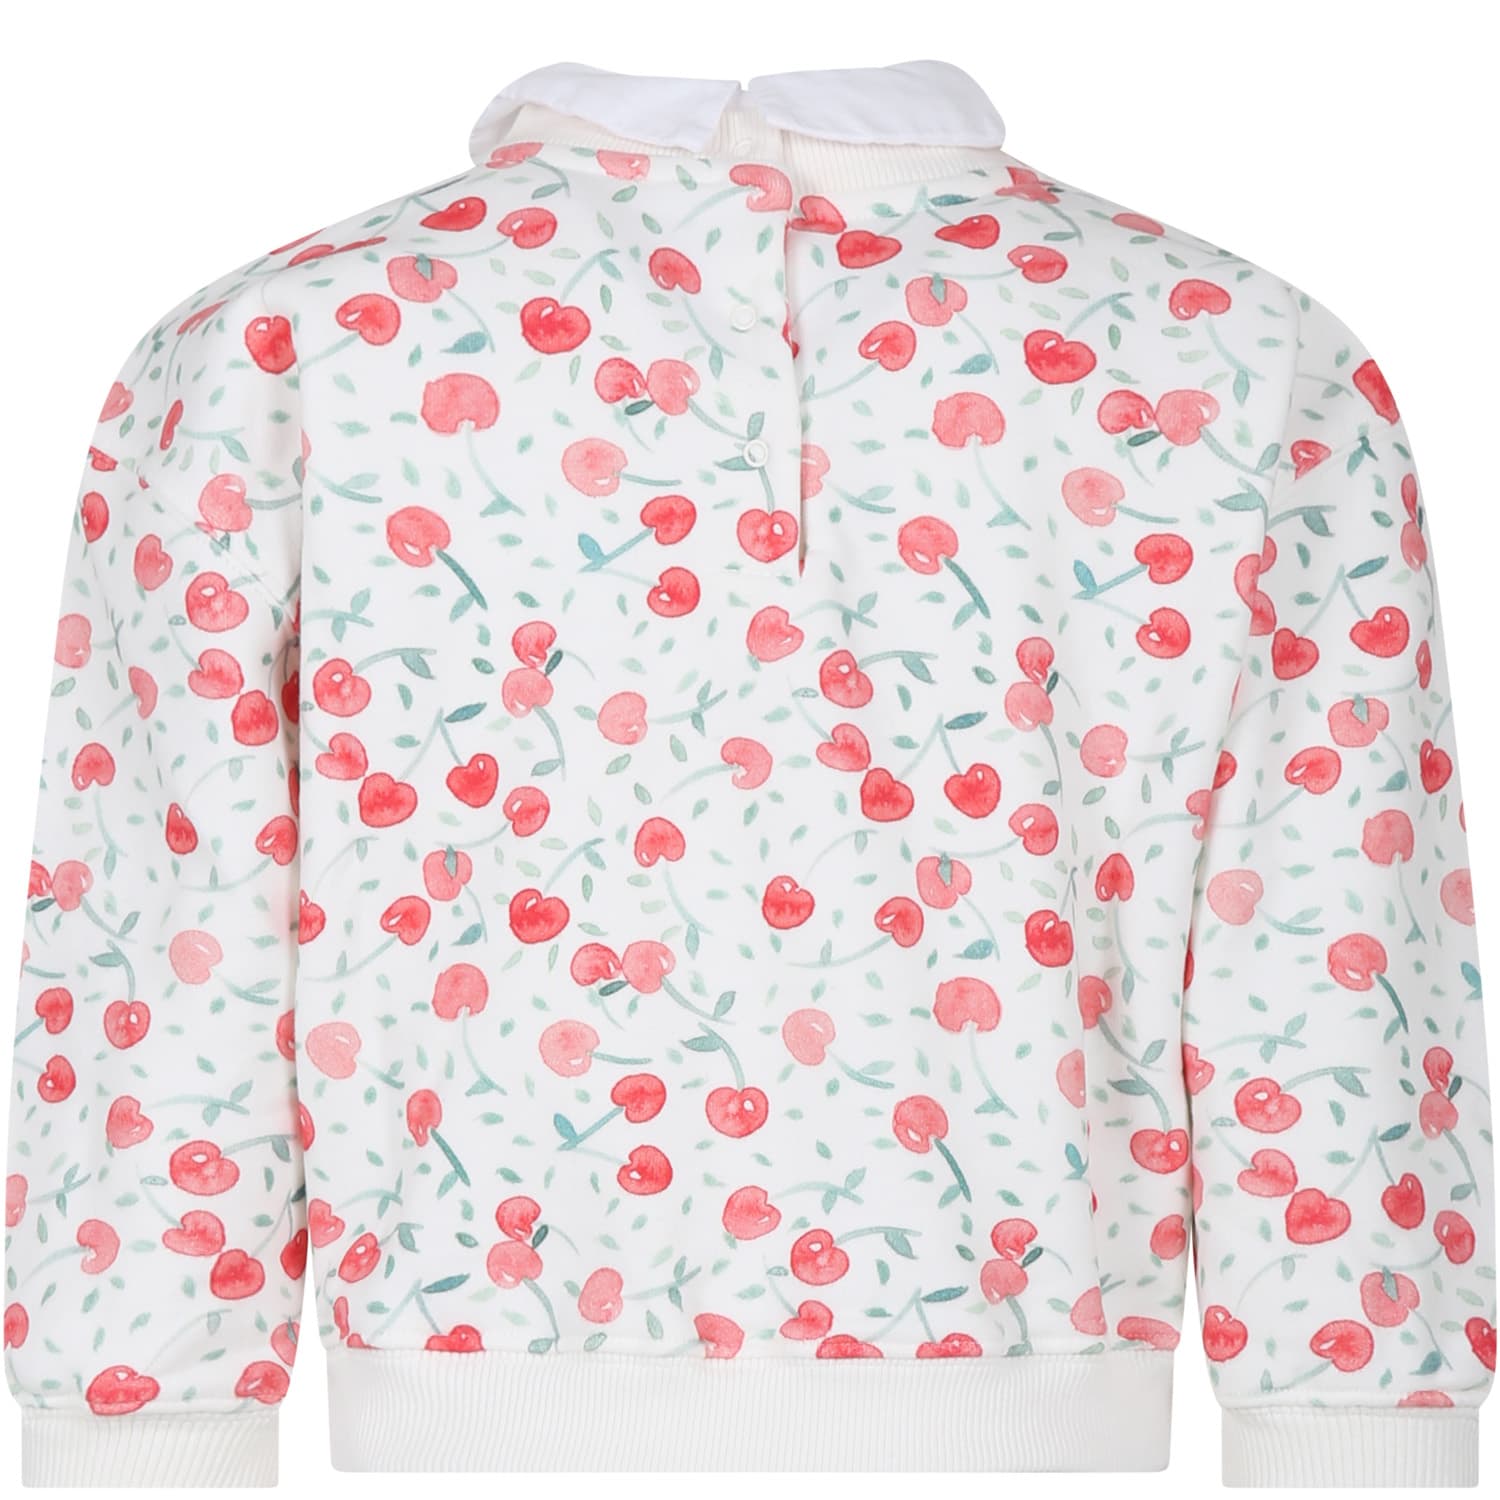 Shop Bonpoint Ivory Sweatshirt For Girl With Iconic Cherries In White